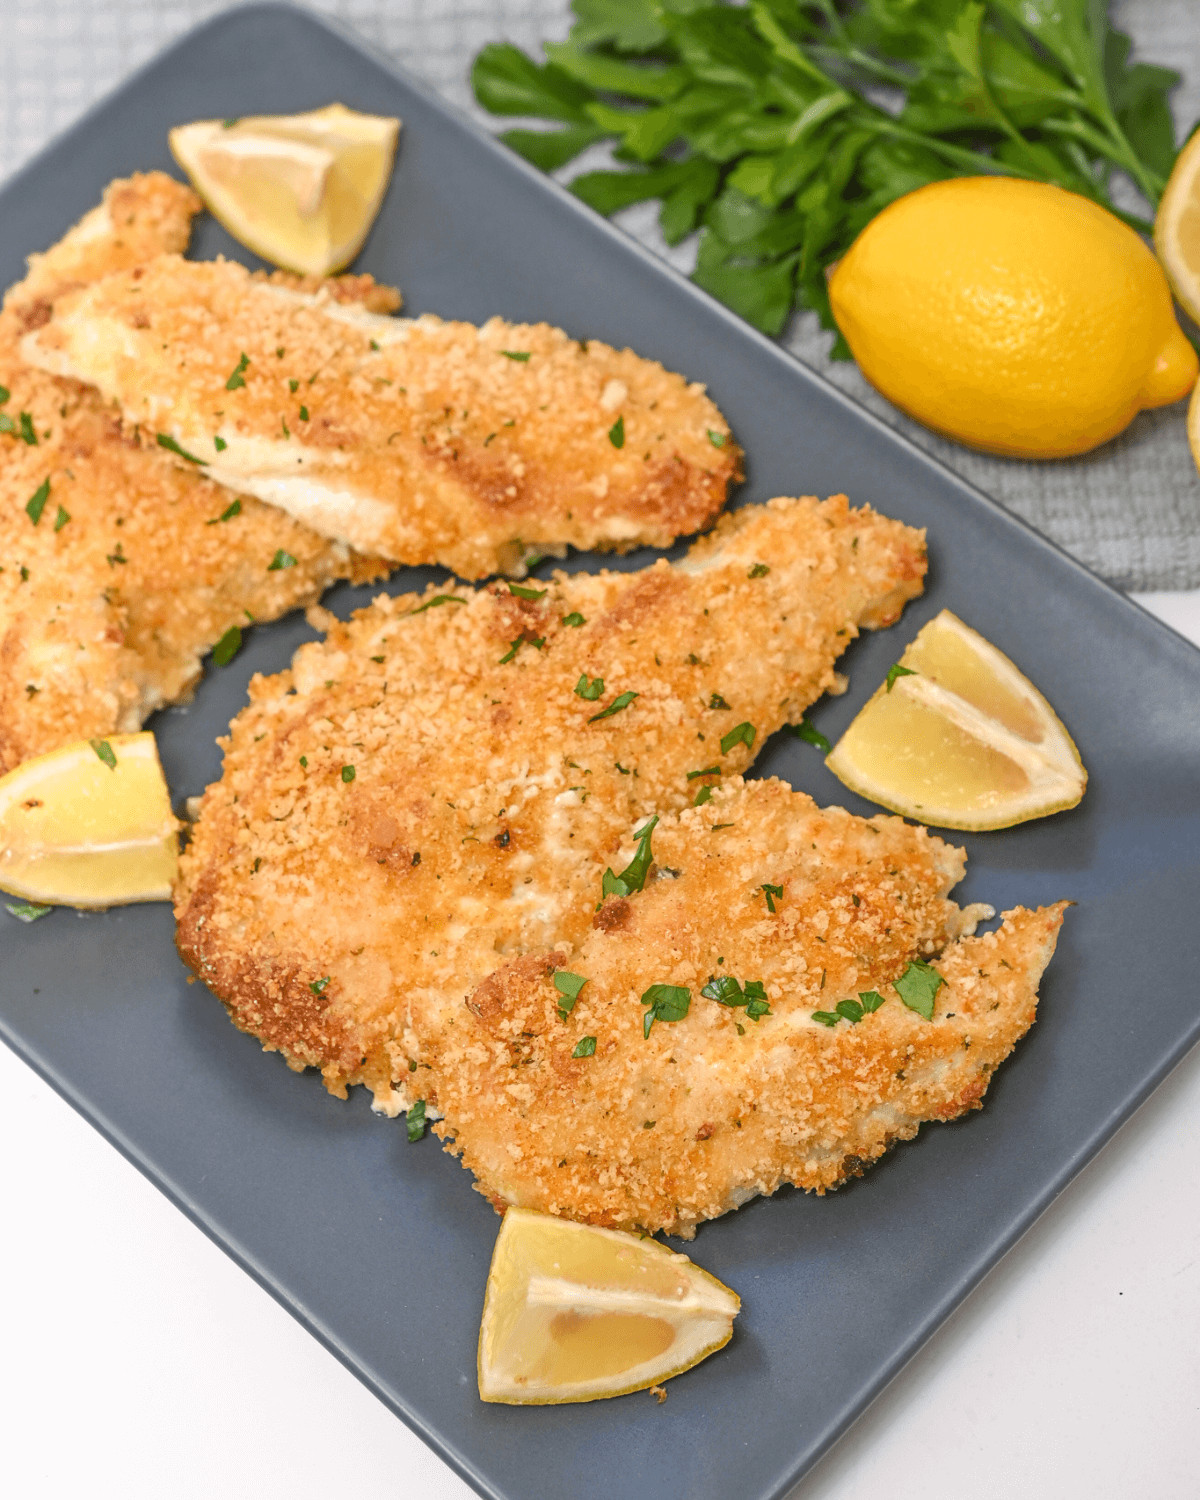 Parmesan Herb Crusted Chicken with lemon and parsley on a plate.